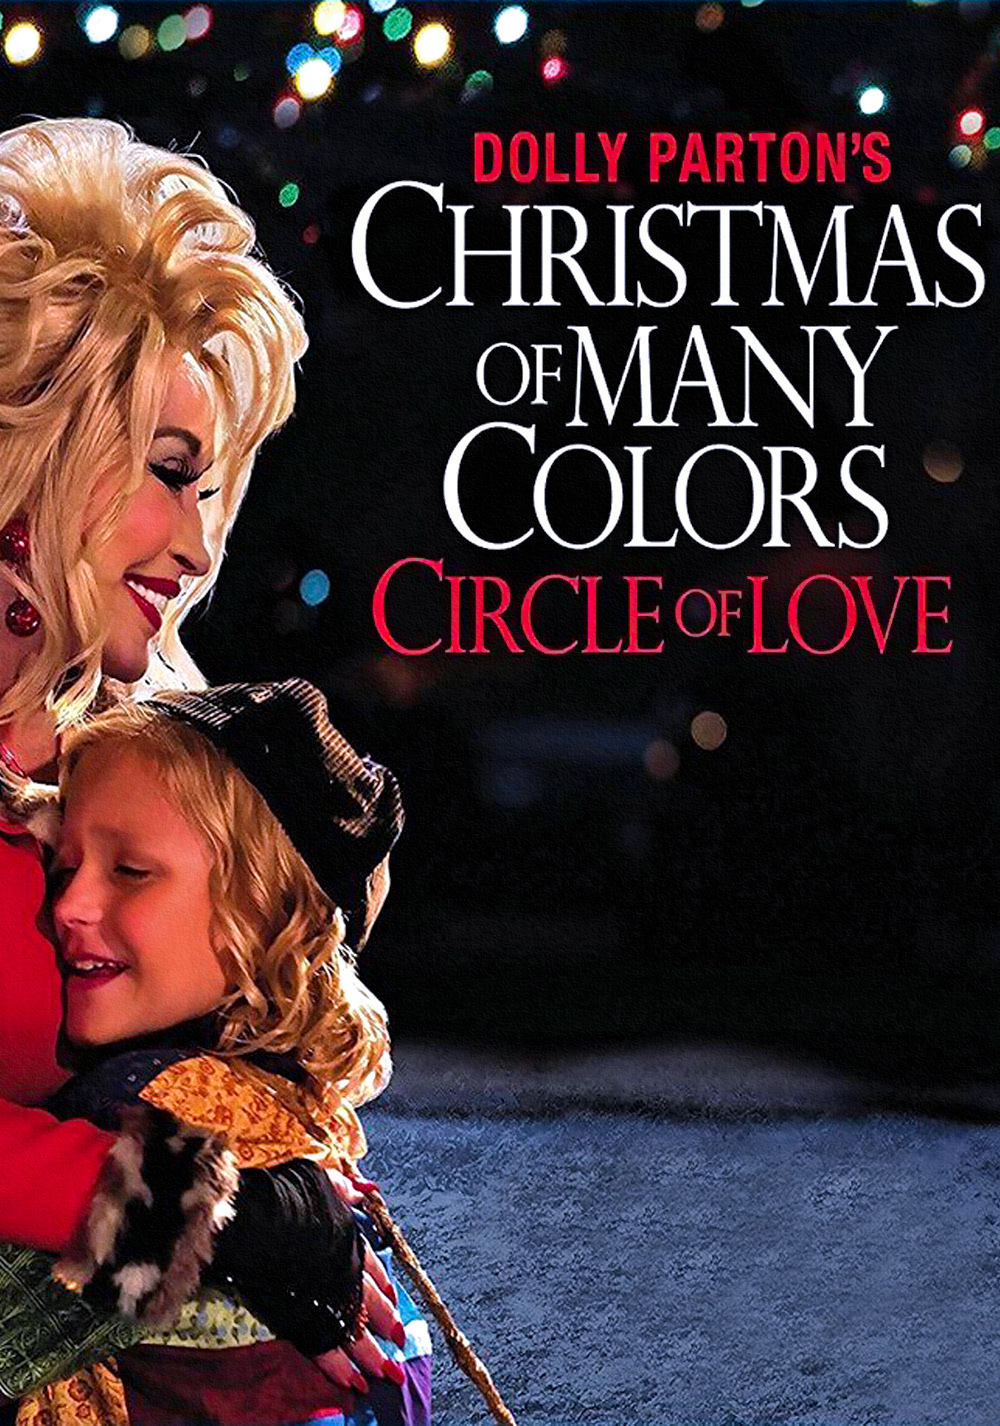 affiche du film Dolly Parton's Christmas of Many Colors: Circle of Love